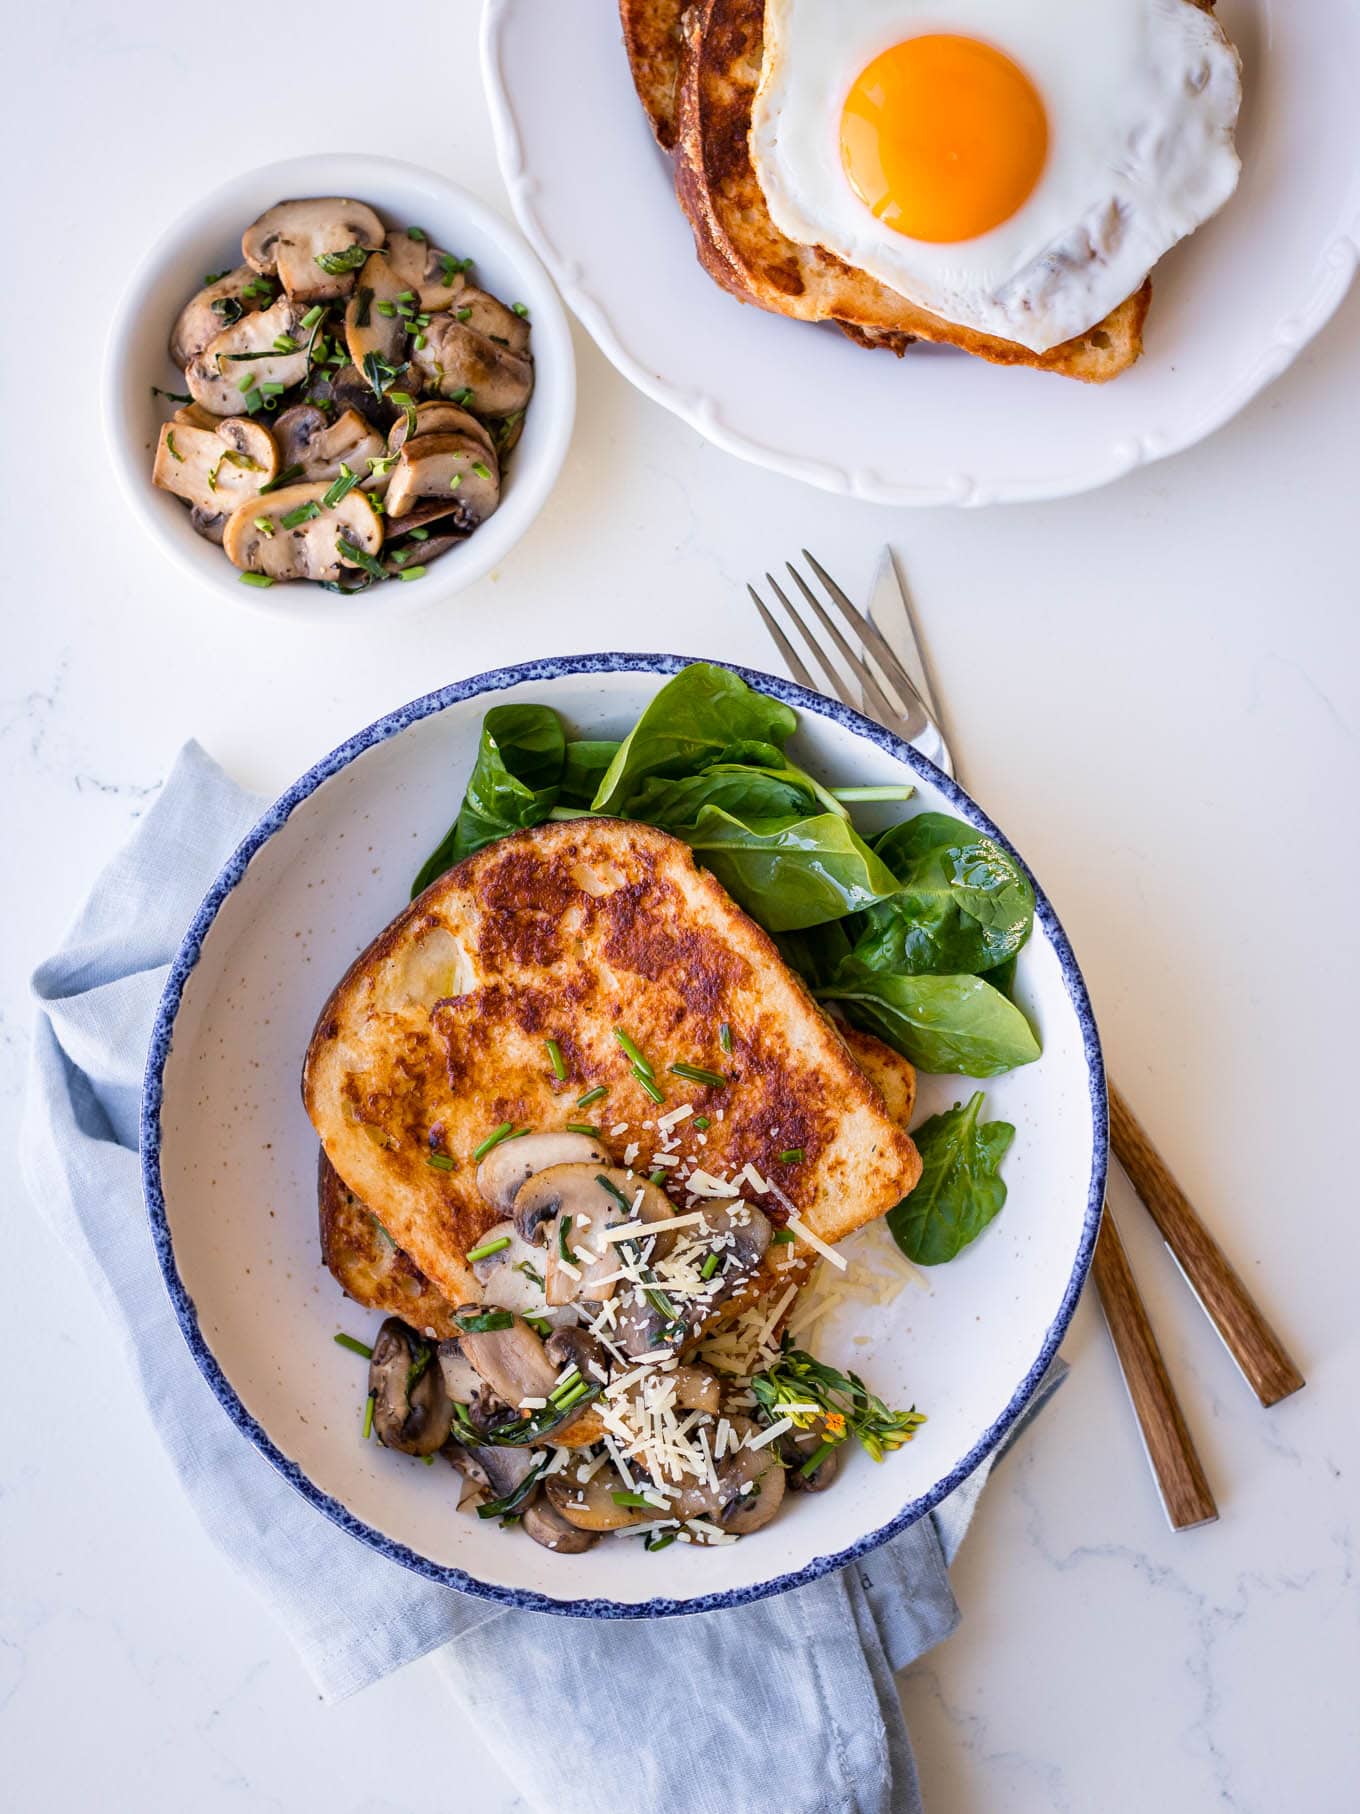 Savoury french toast with mushrooms and parmesan, white bowl, blue napkin